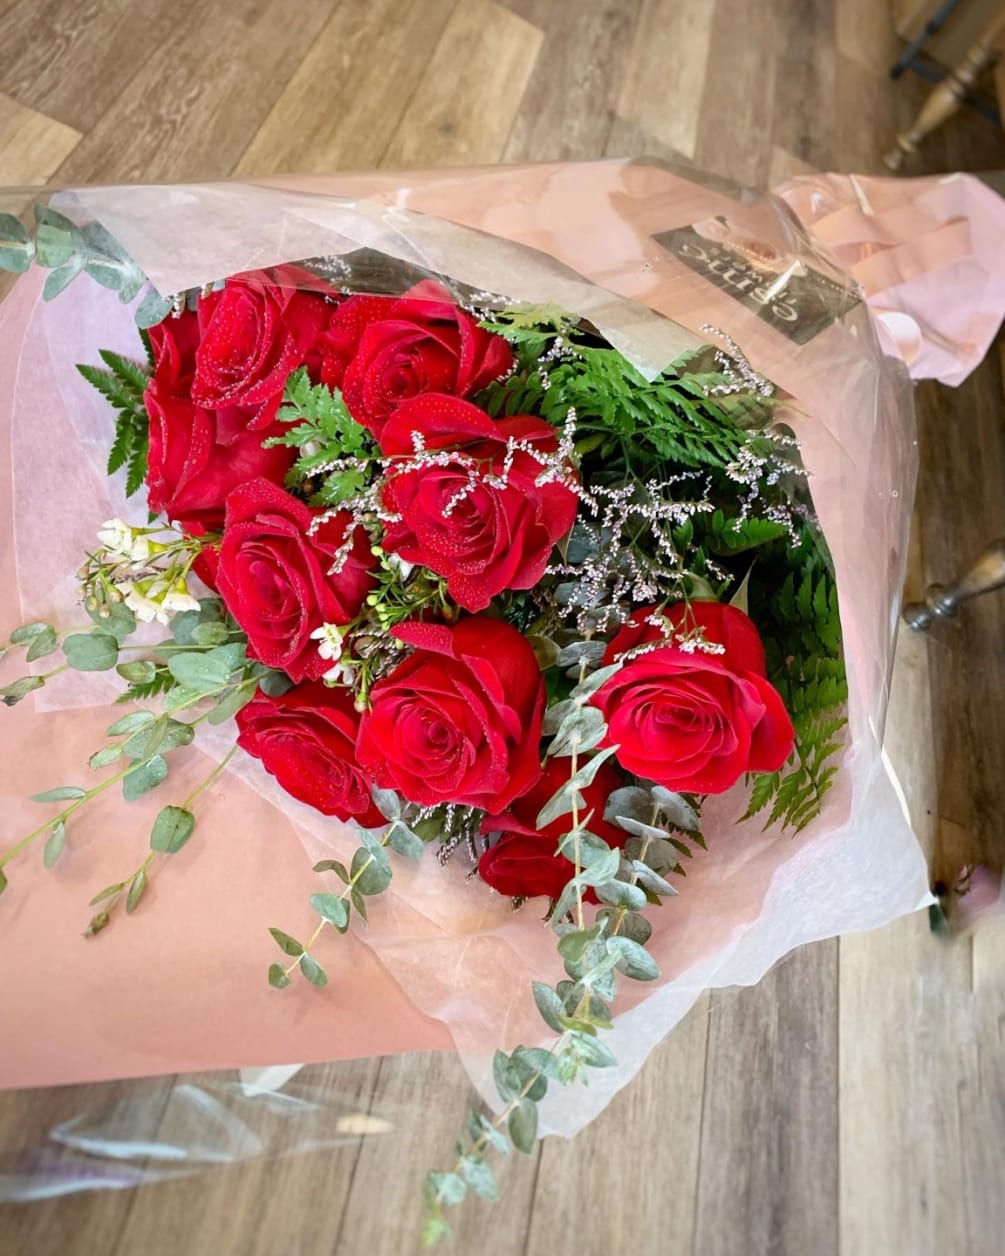 A beautiful hand wrapped arrangement of premium long stem red roses.

-STANDARD: 12